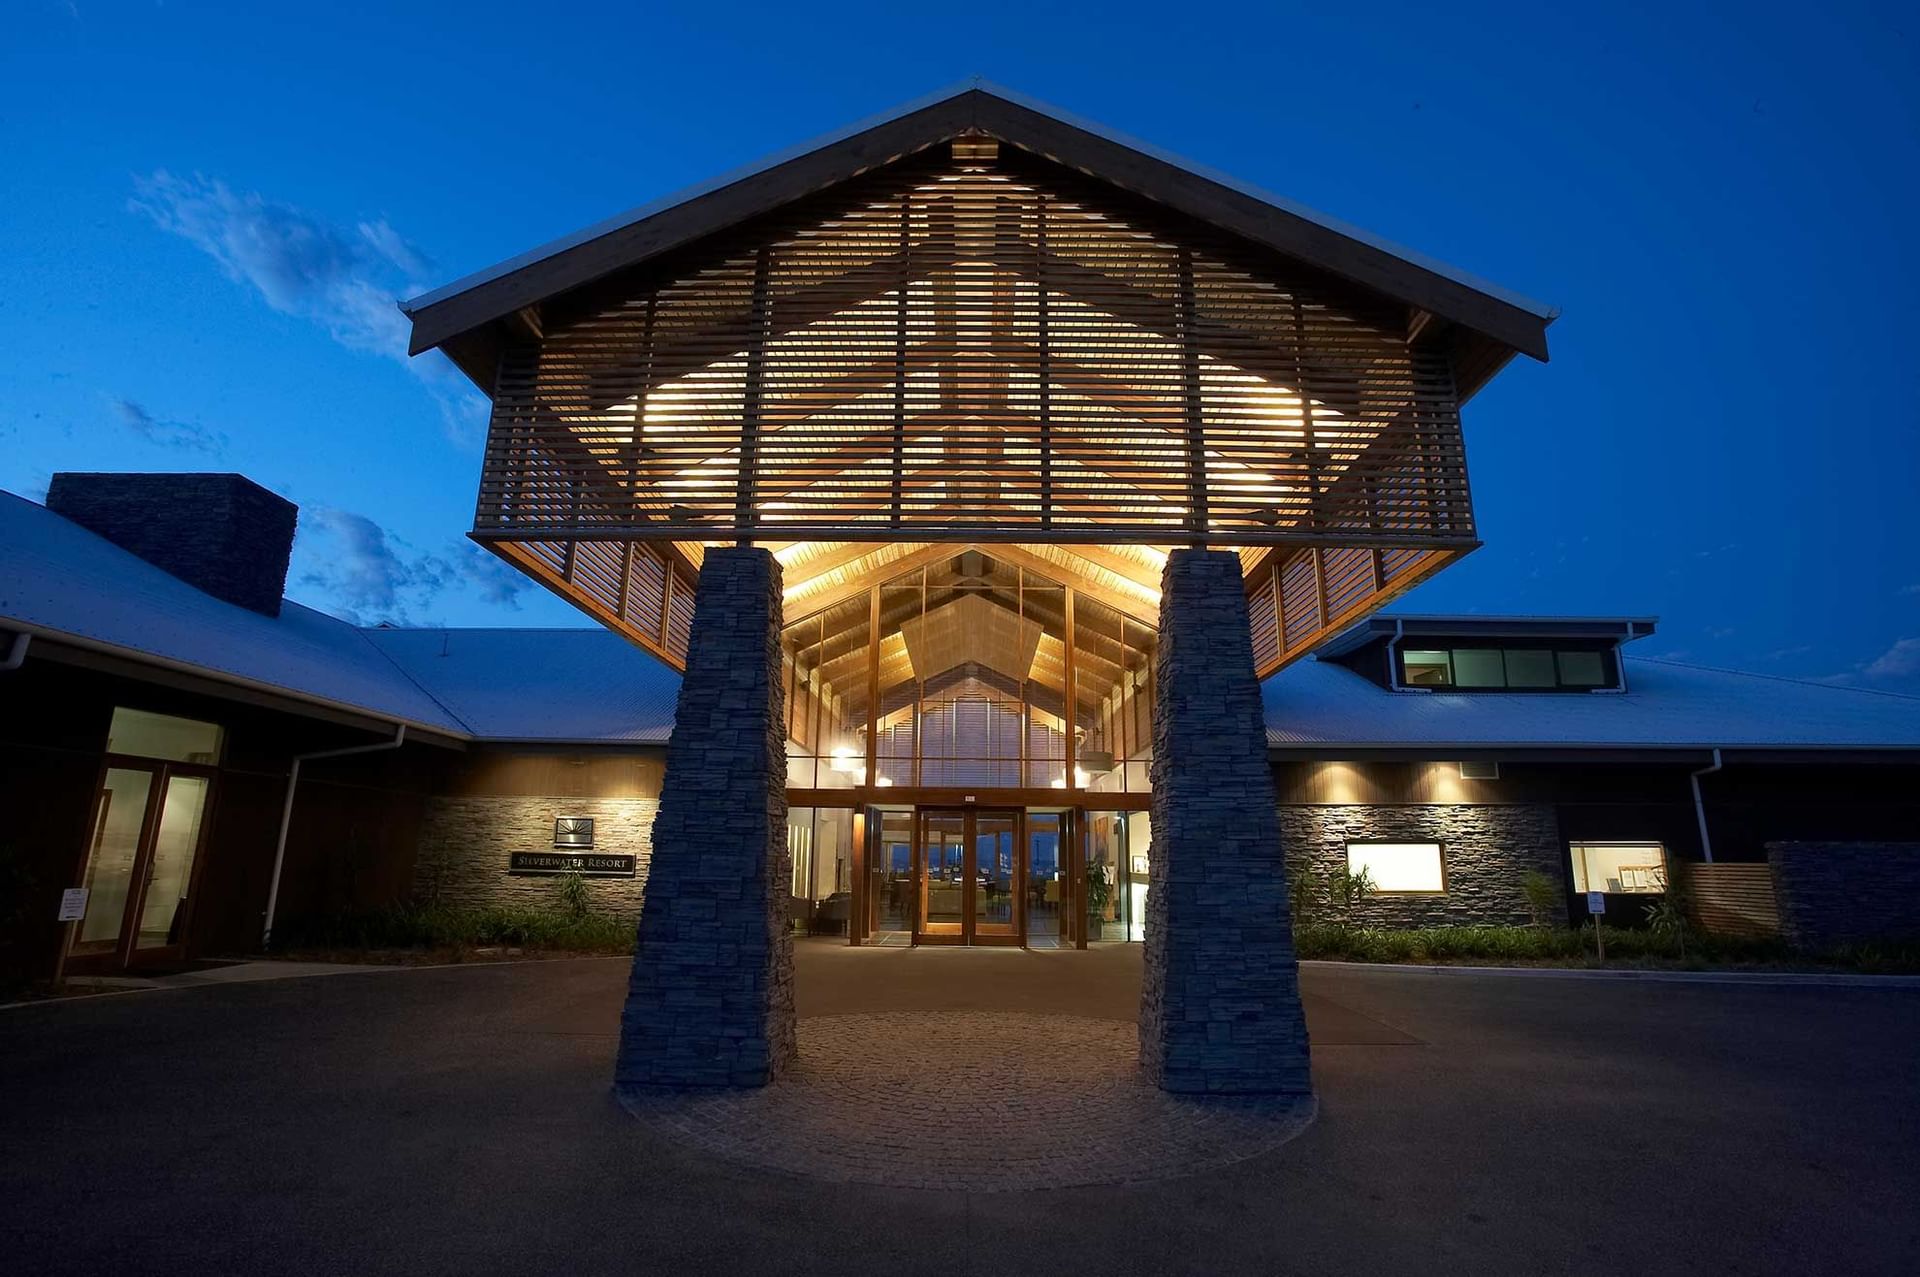 Exterior & front view of the entrance at Silverwater Resort